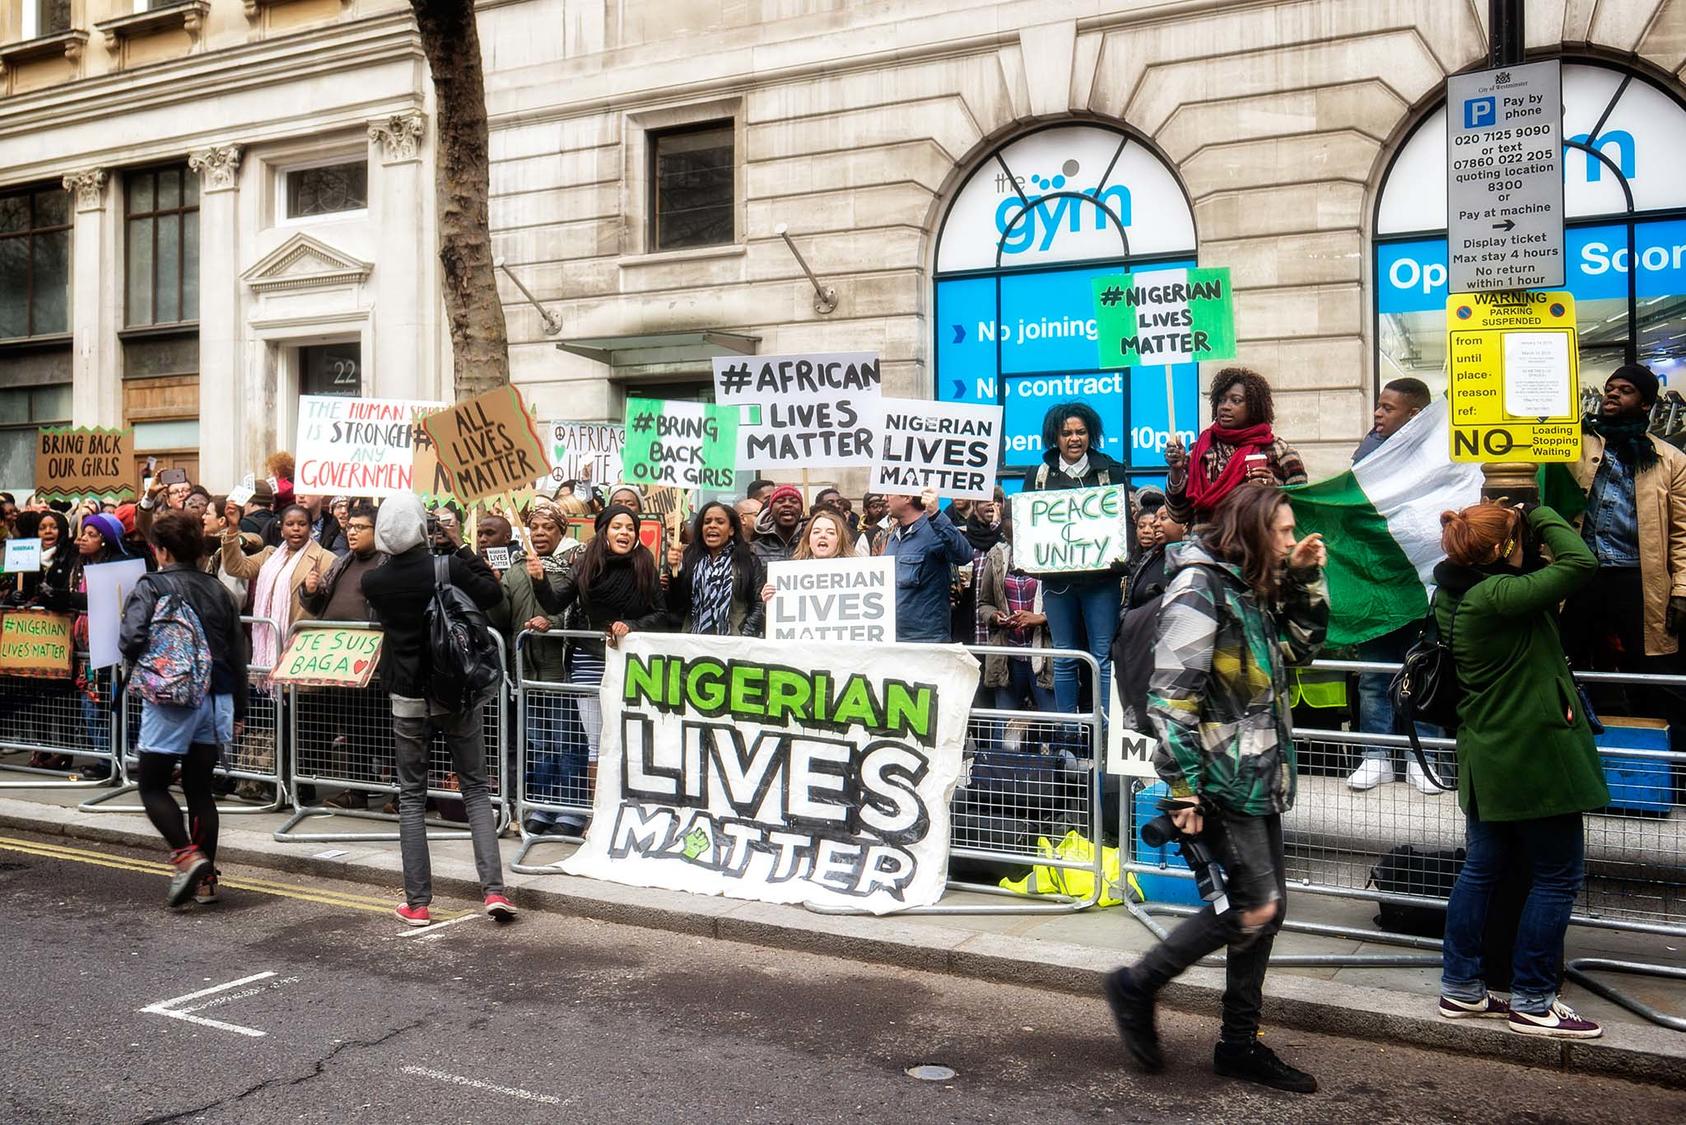 Nigerian expatriates and Britons in London protest a mass kidnapping in Nigeria in 2015. Domestic and global pressures have led to Nigerian officials reportedly negotiating ransom payments that have fueled more abductions. (Garry Knight/CC License 2.0)